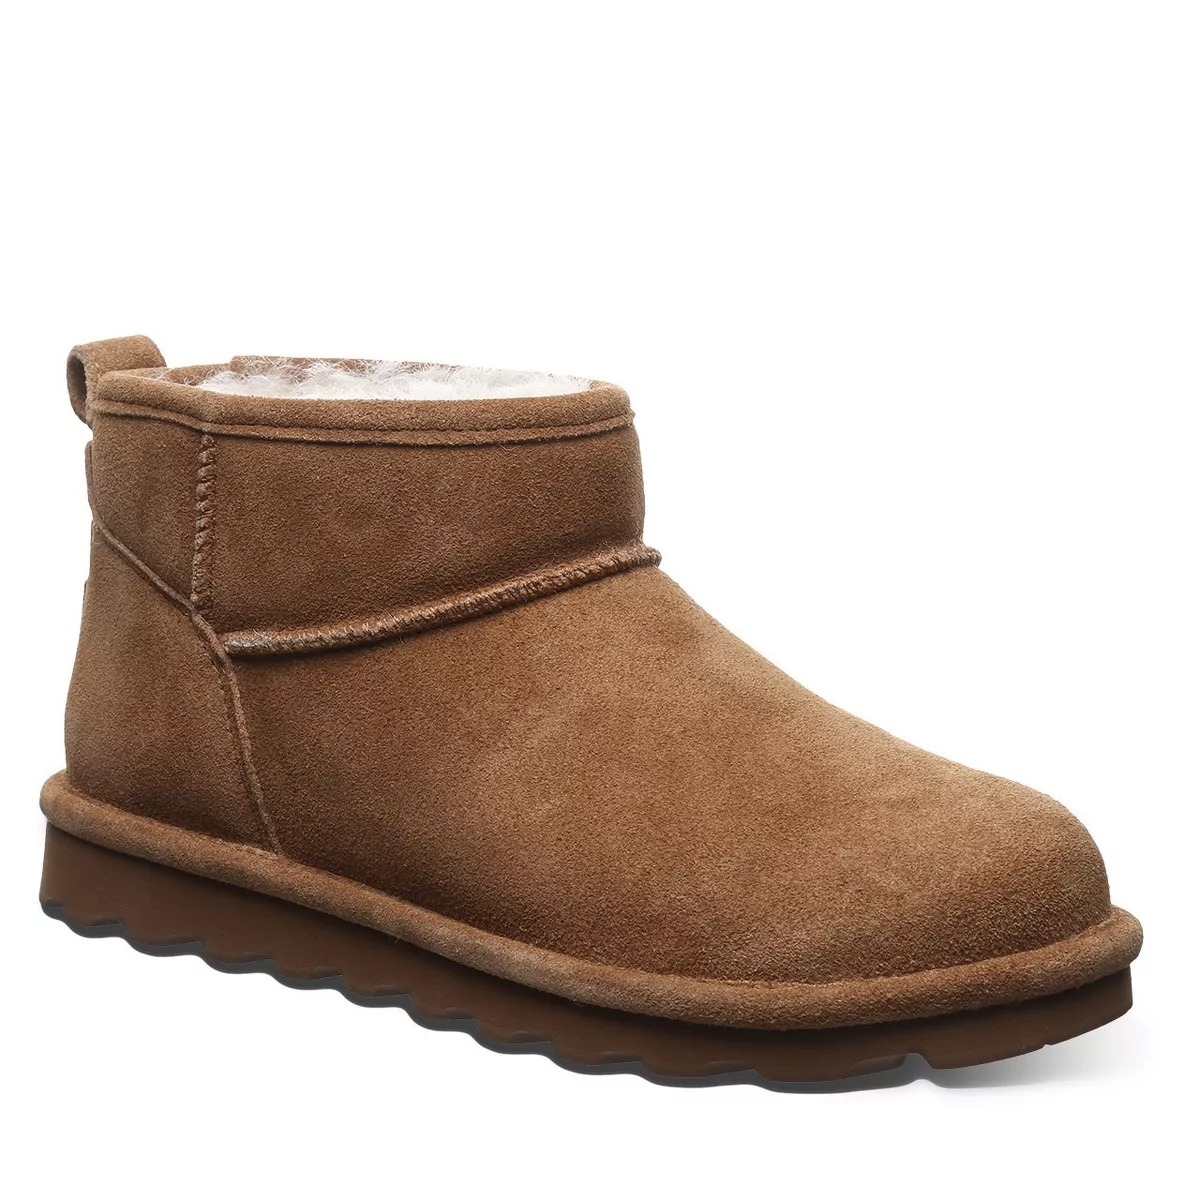 light brown ankle boots with sheepskin interior lining